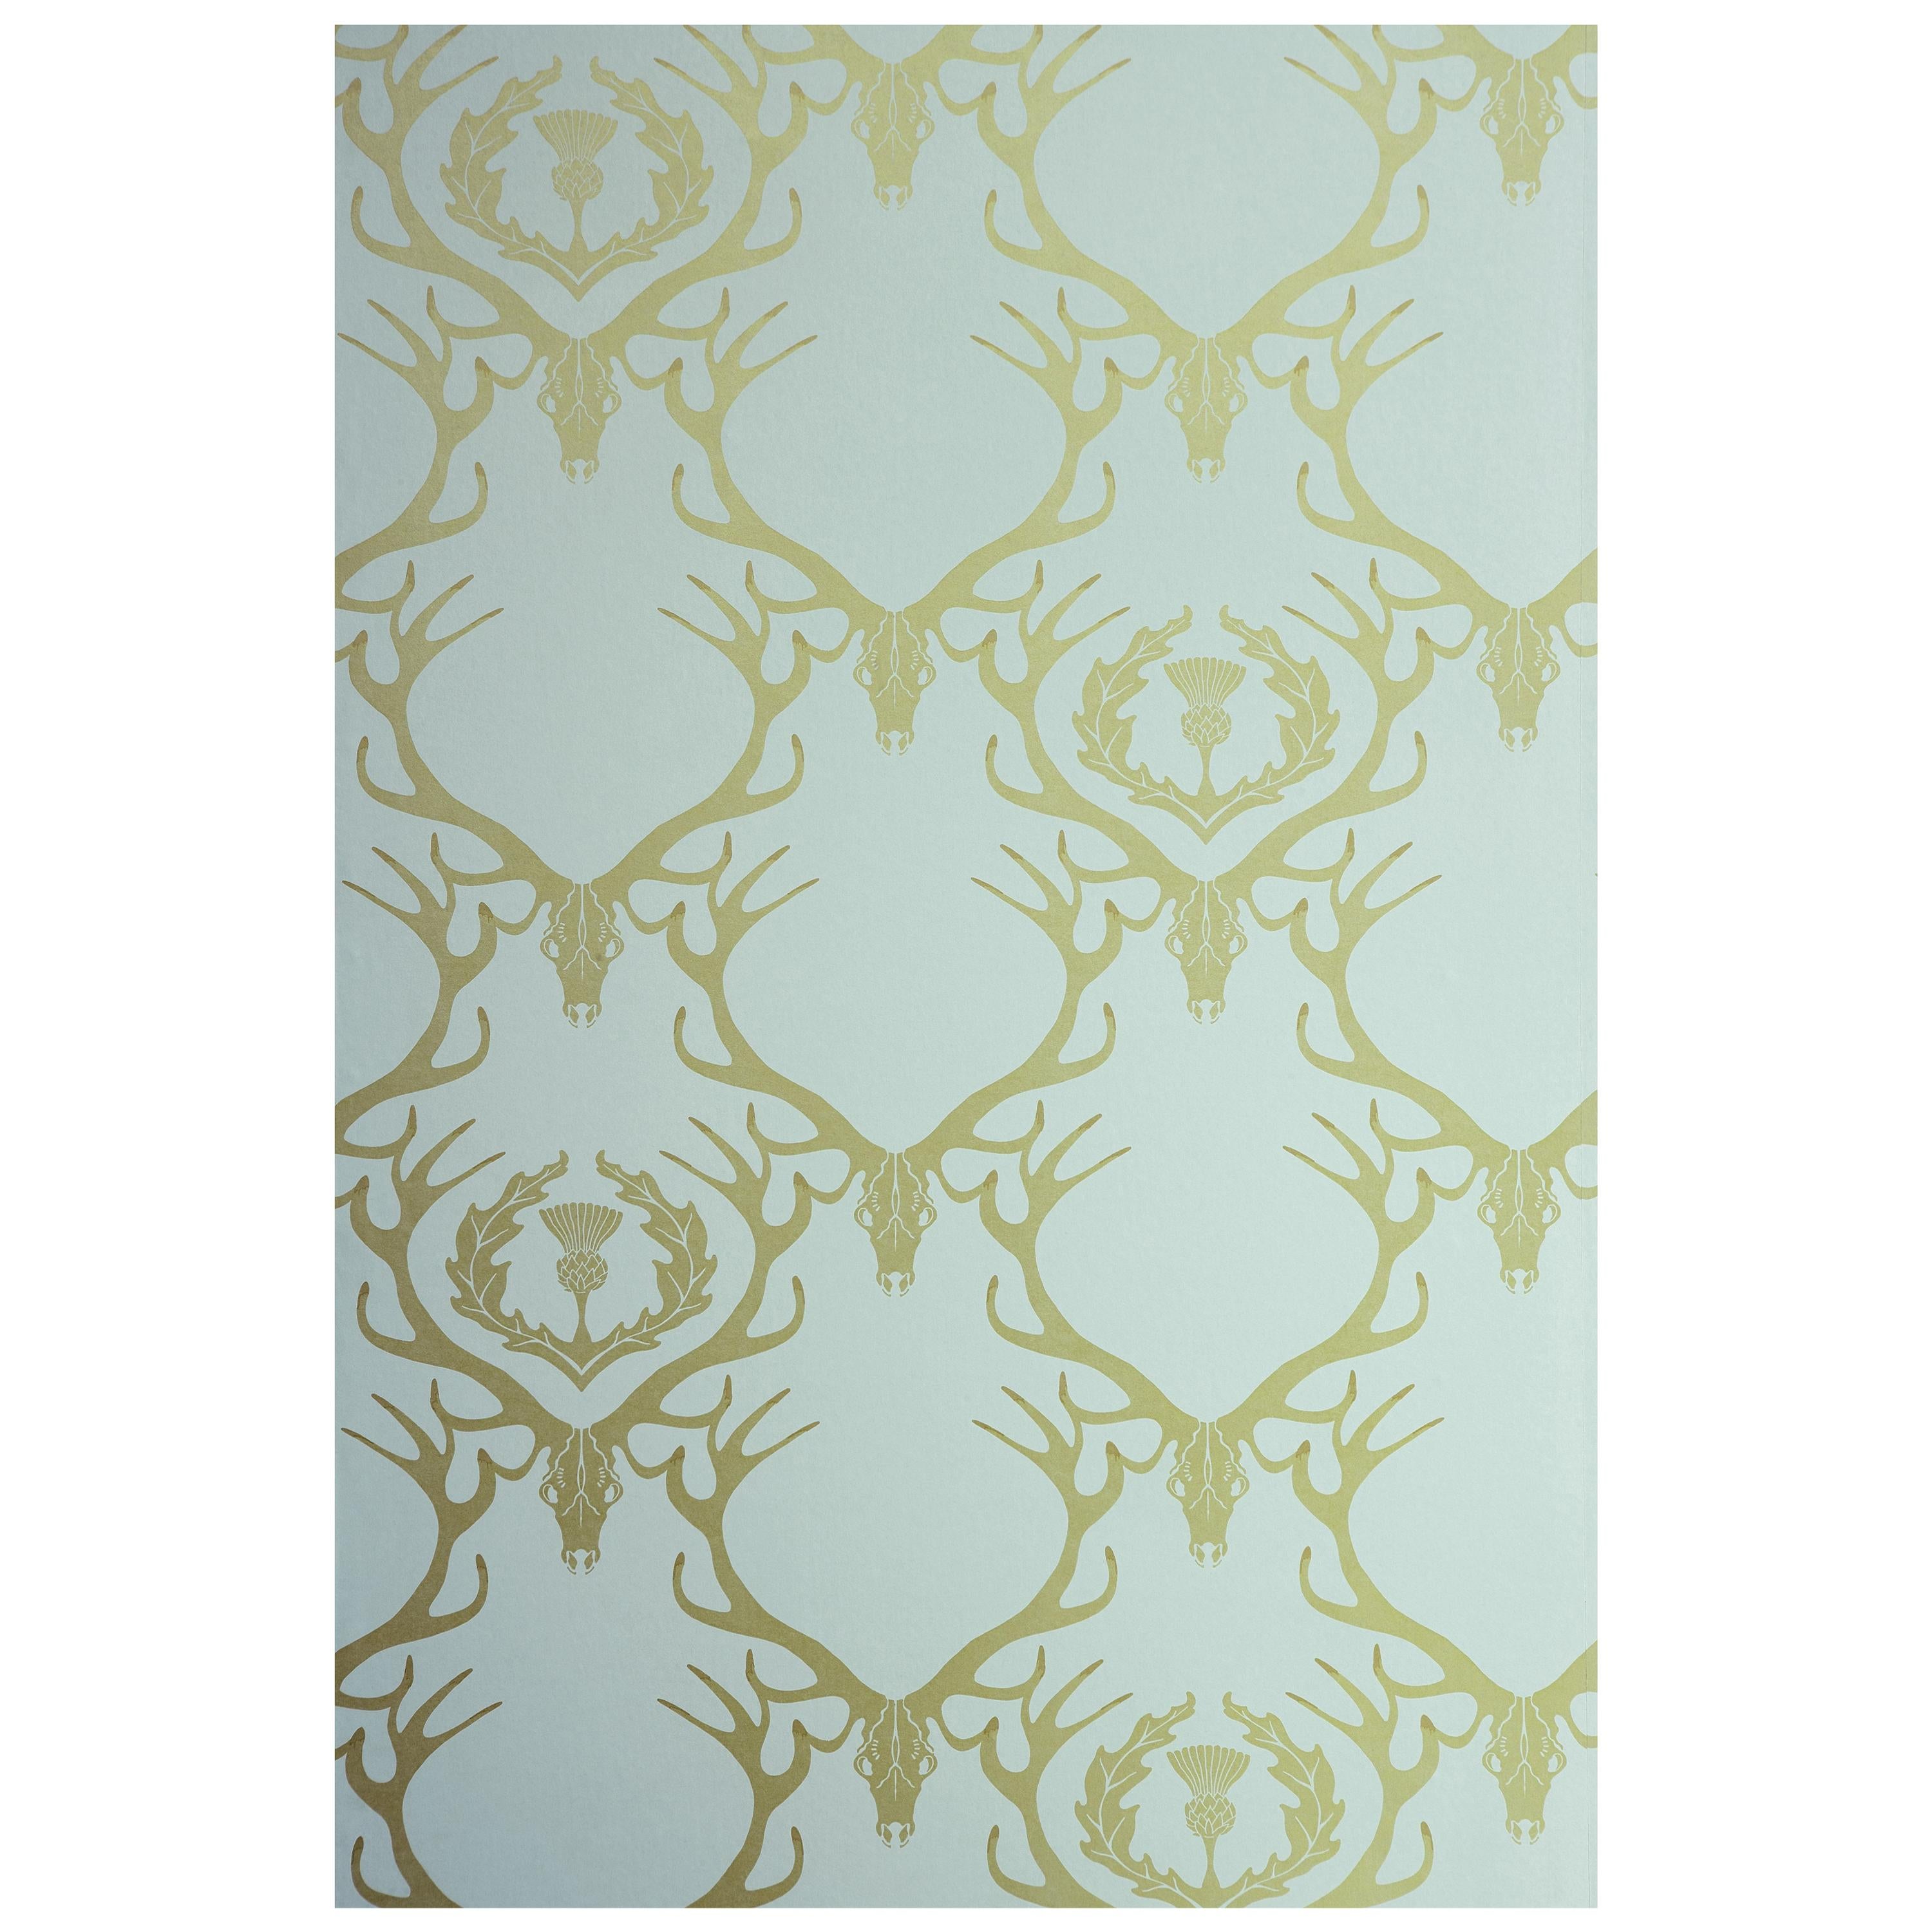 'Deer Damask' Contemporary, Traditional Wallpaper in Duck Egg For Sale